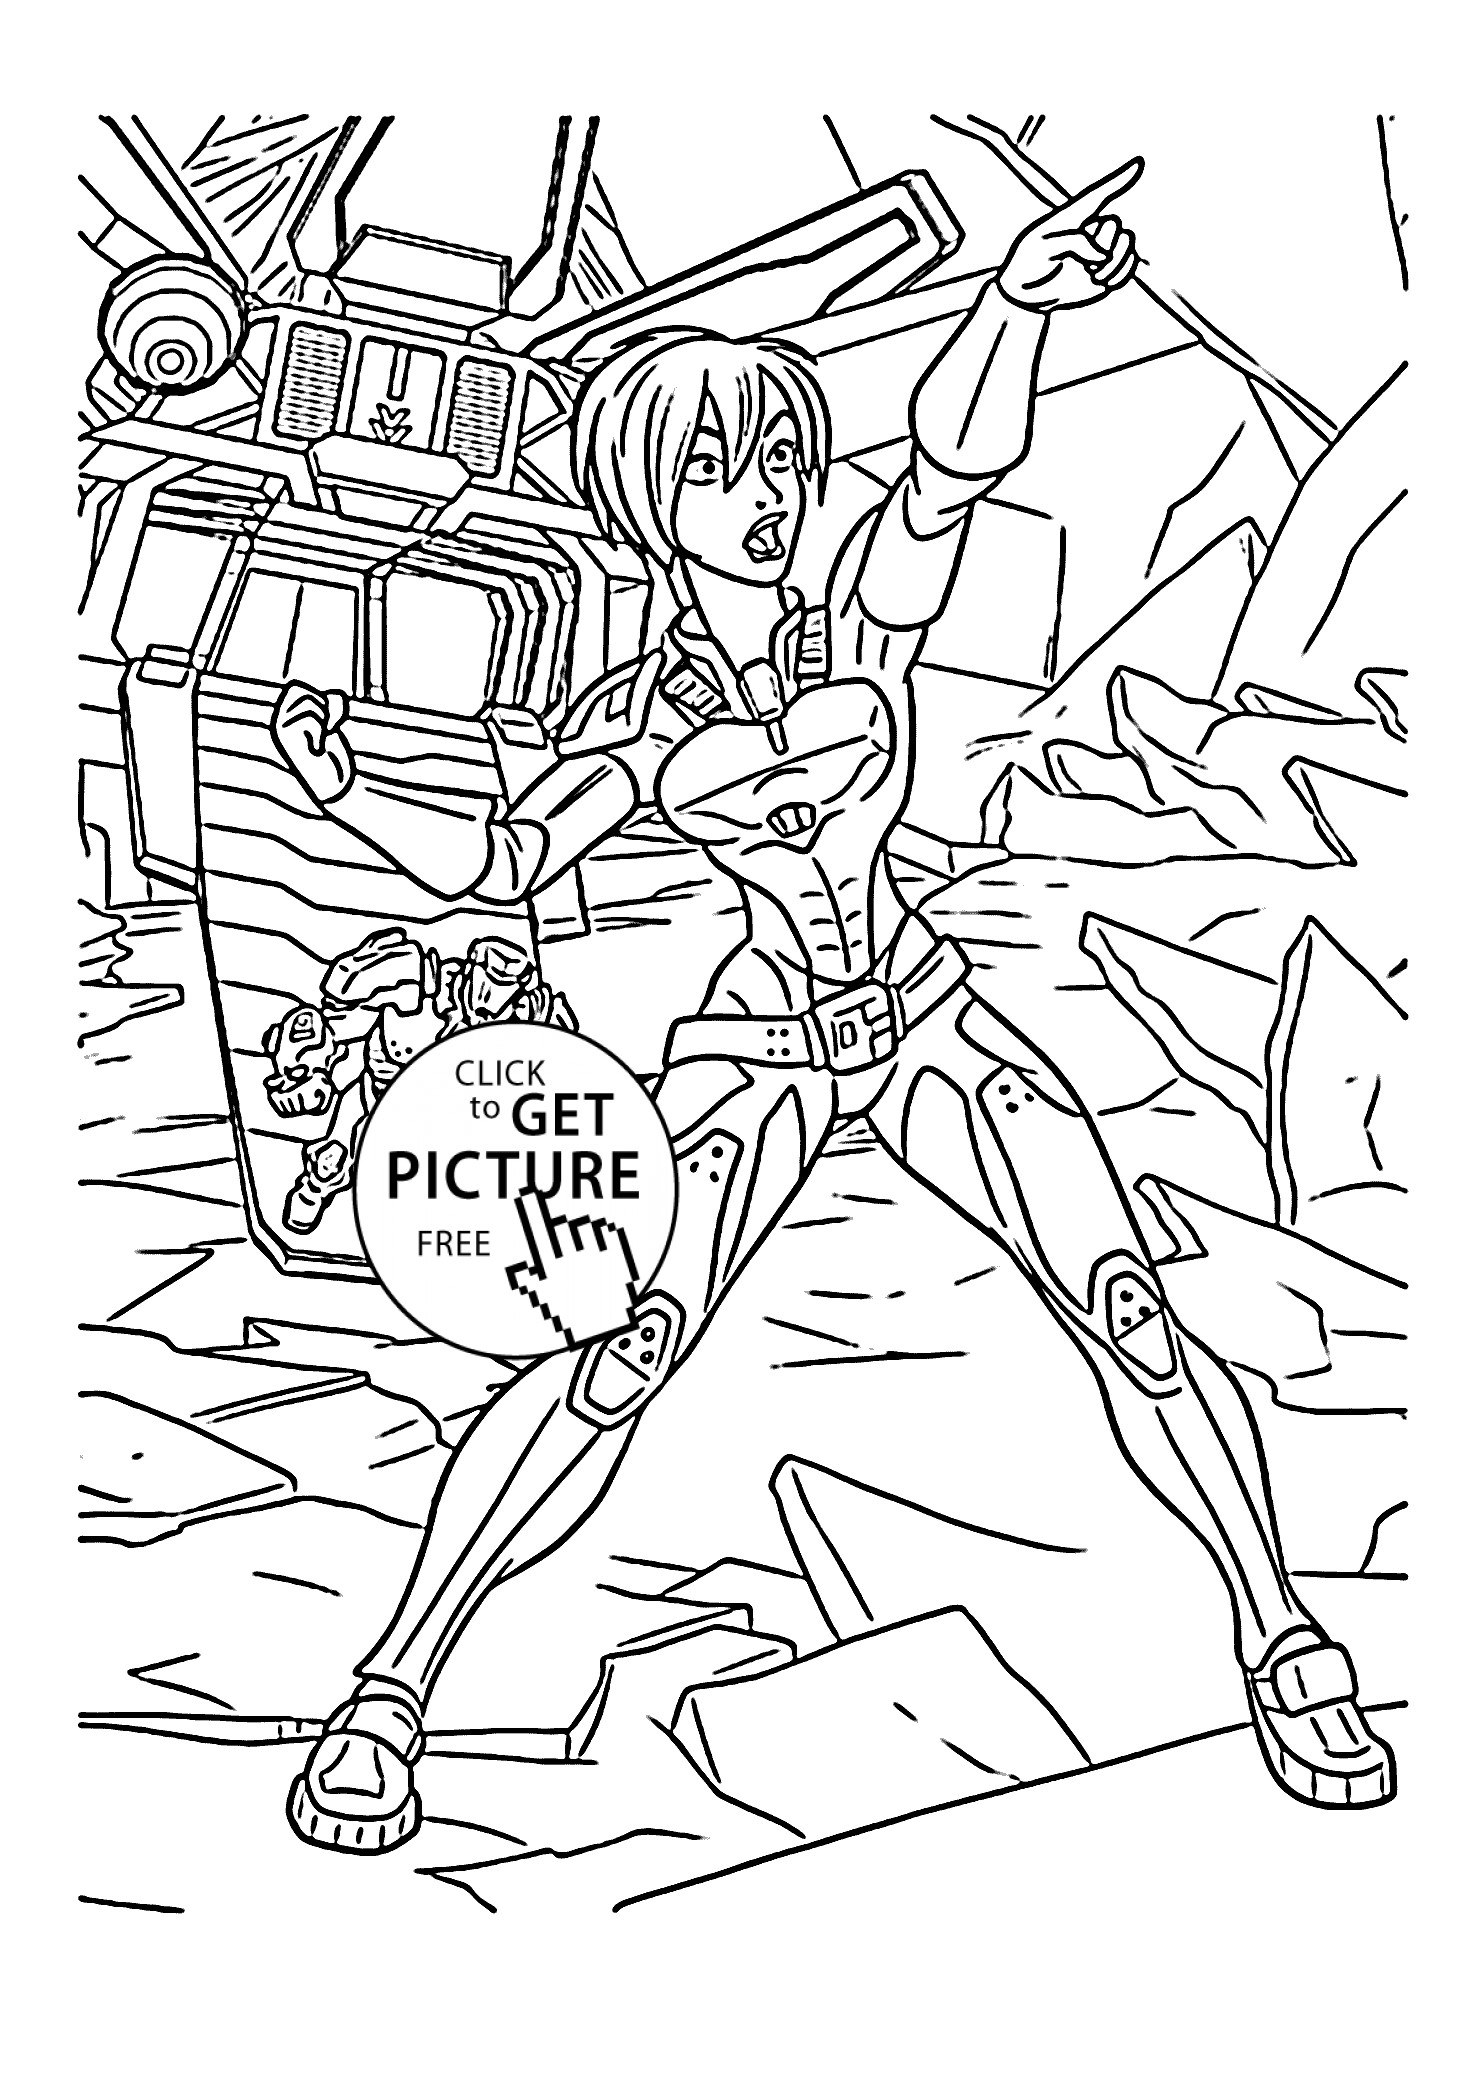 Printable Childrens Coloring Pages
 Calhoun coloring pages for kids printable free Wreck it